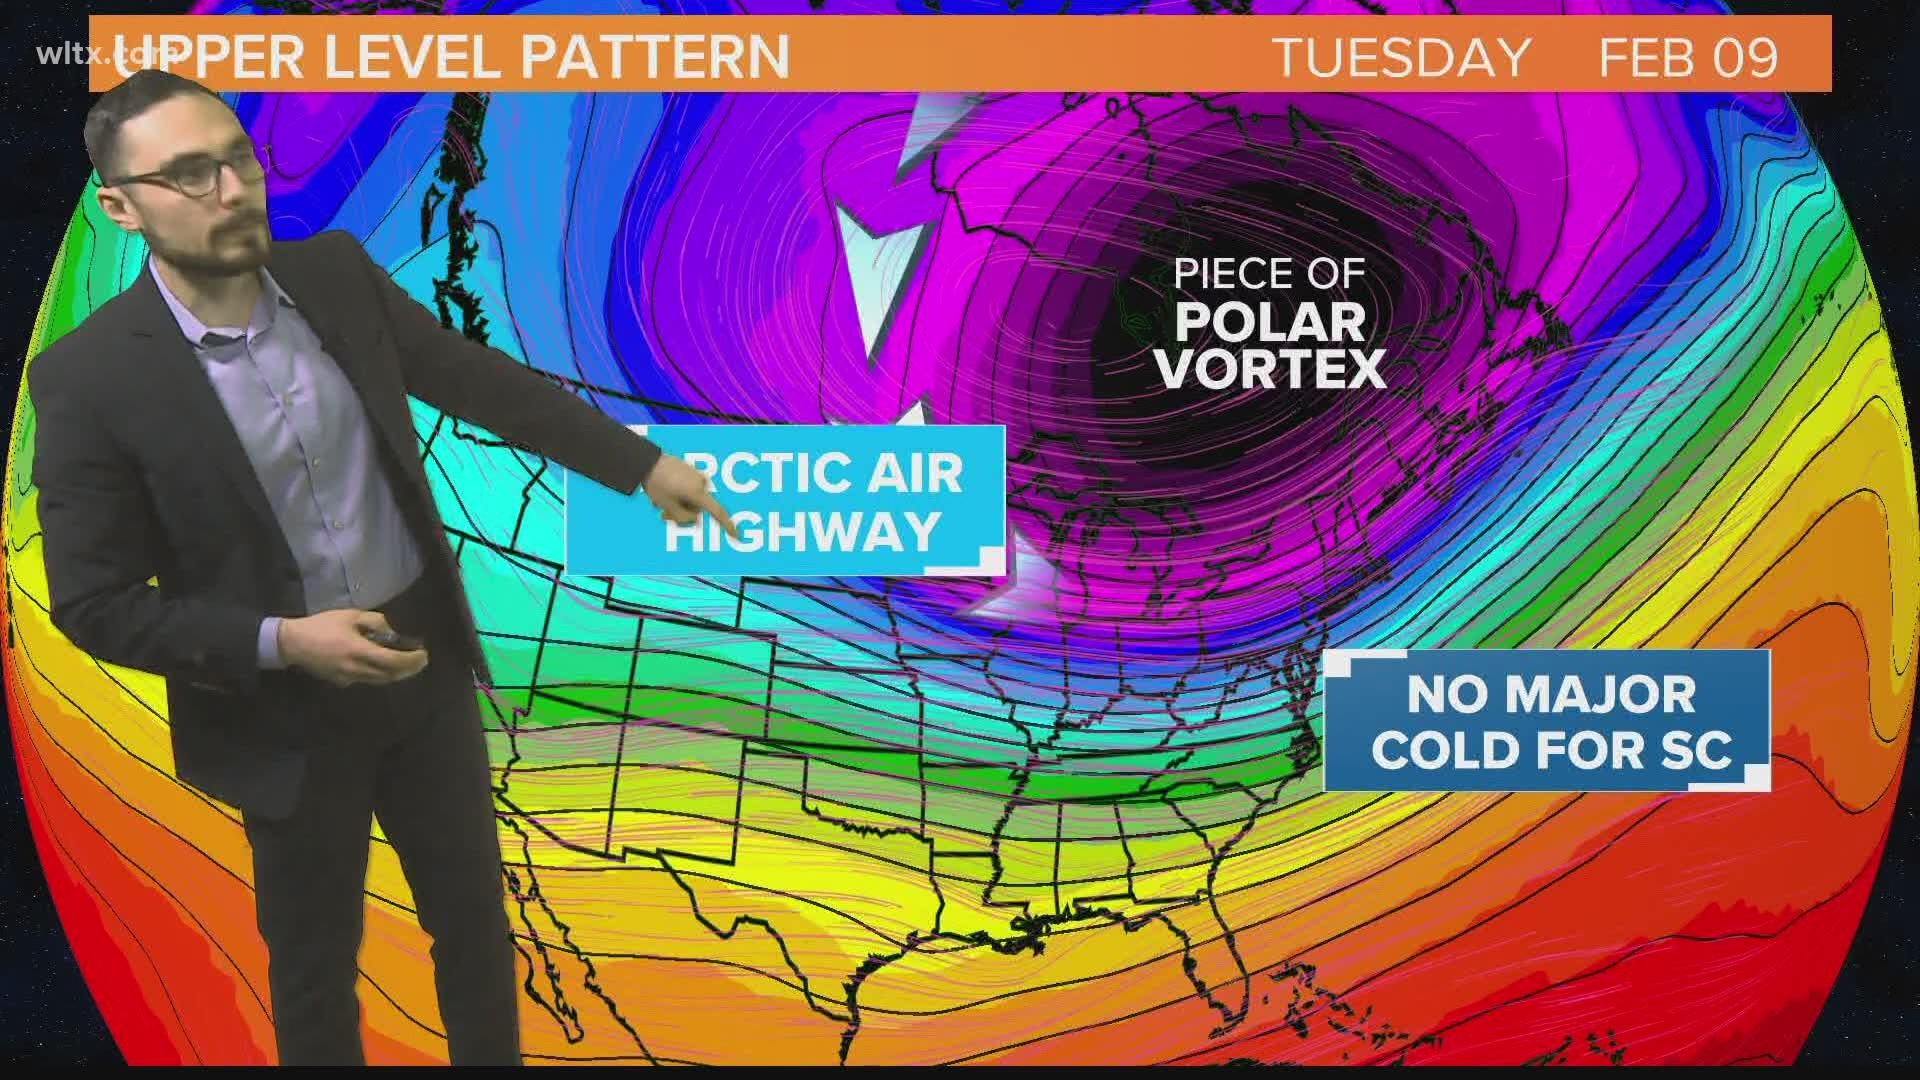 When the weather gets cold, the term "Polar Vortex" gets thrown around a lot. We explain what it means and who could feel truly arctic air from it next week.